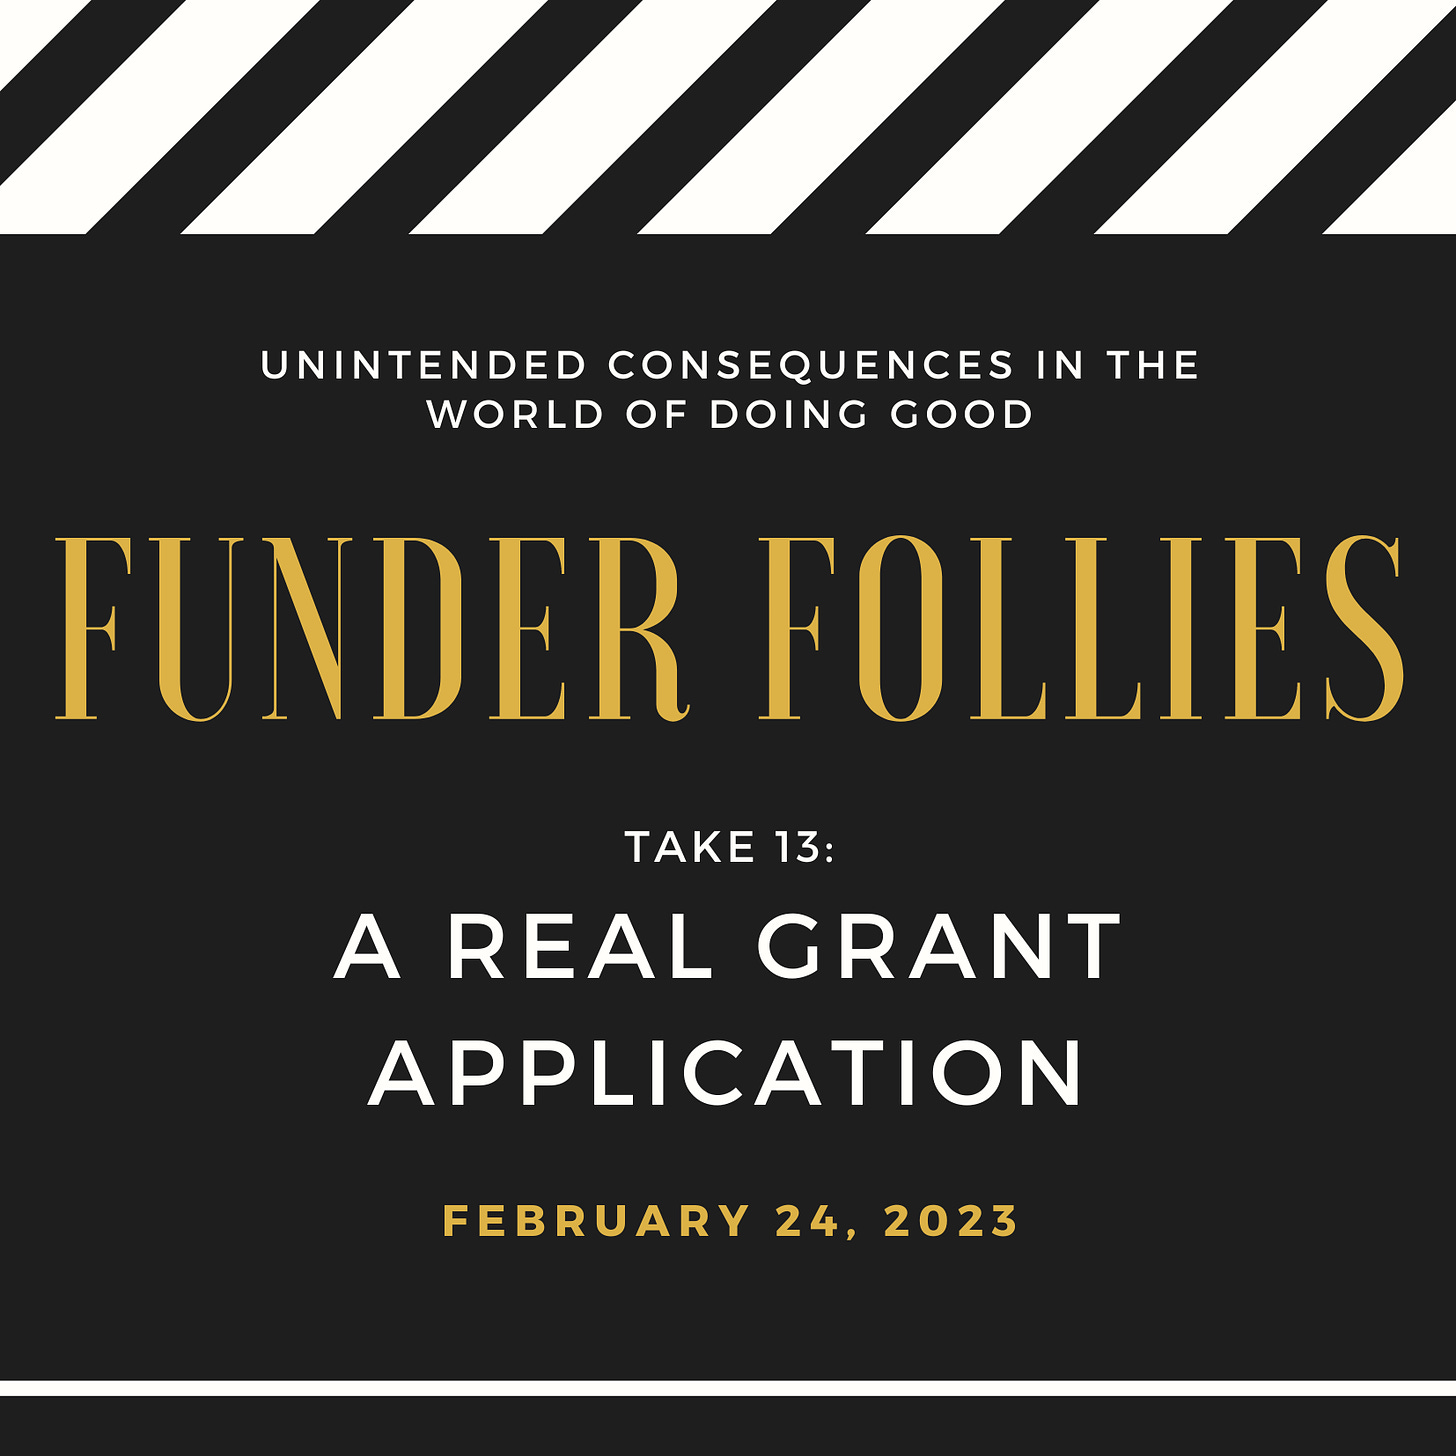 A movie clap-board titled "Funder Follies Take 13: A Real Grant Application" on 2/24/23